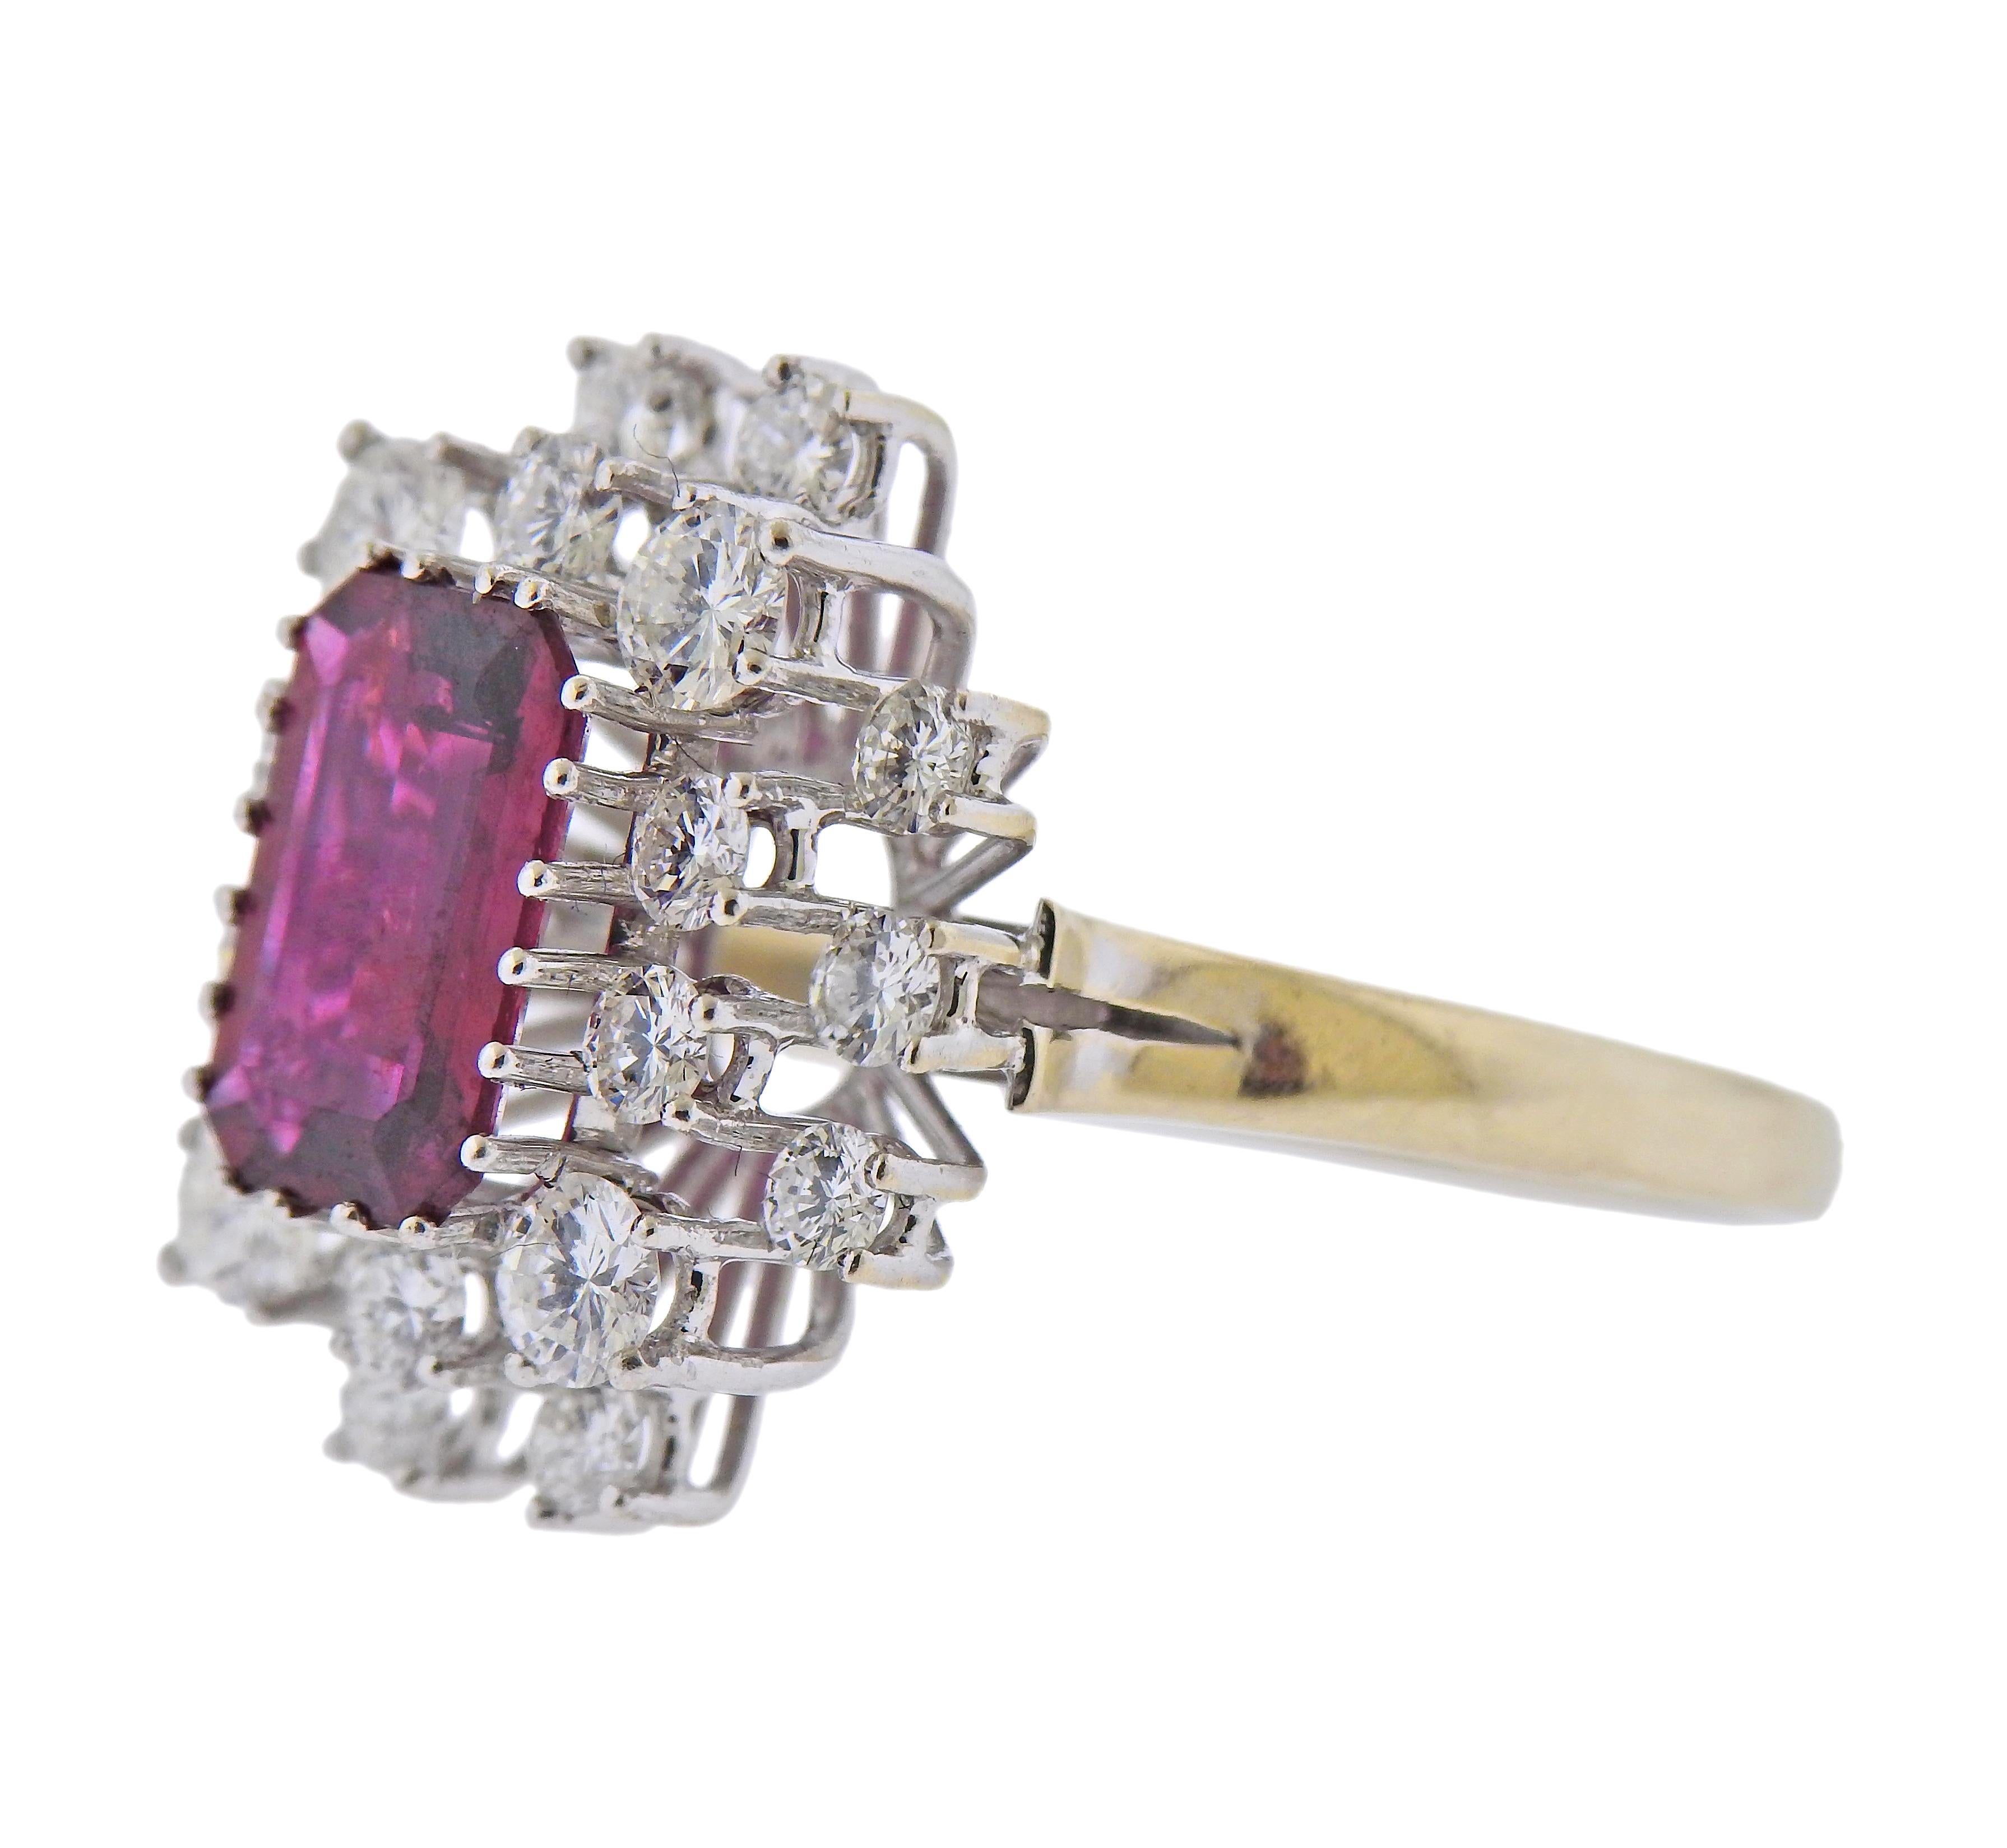 14k white gold cluster ring, with center approx. 2.70ct ruby, surrounded with approx. 2.10ctw in diamonds. Ring size - 11.25, ring top - 21mm x 18mm. Marked: 585, Elsa. Weight - 6.9 grams.